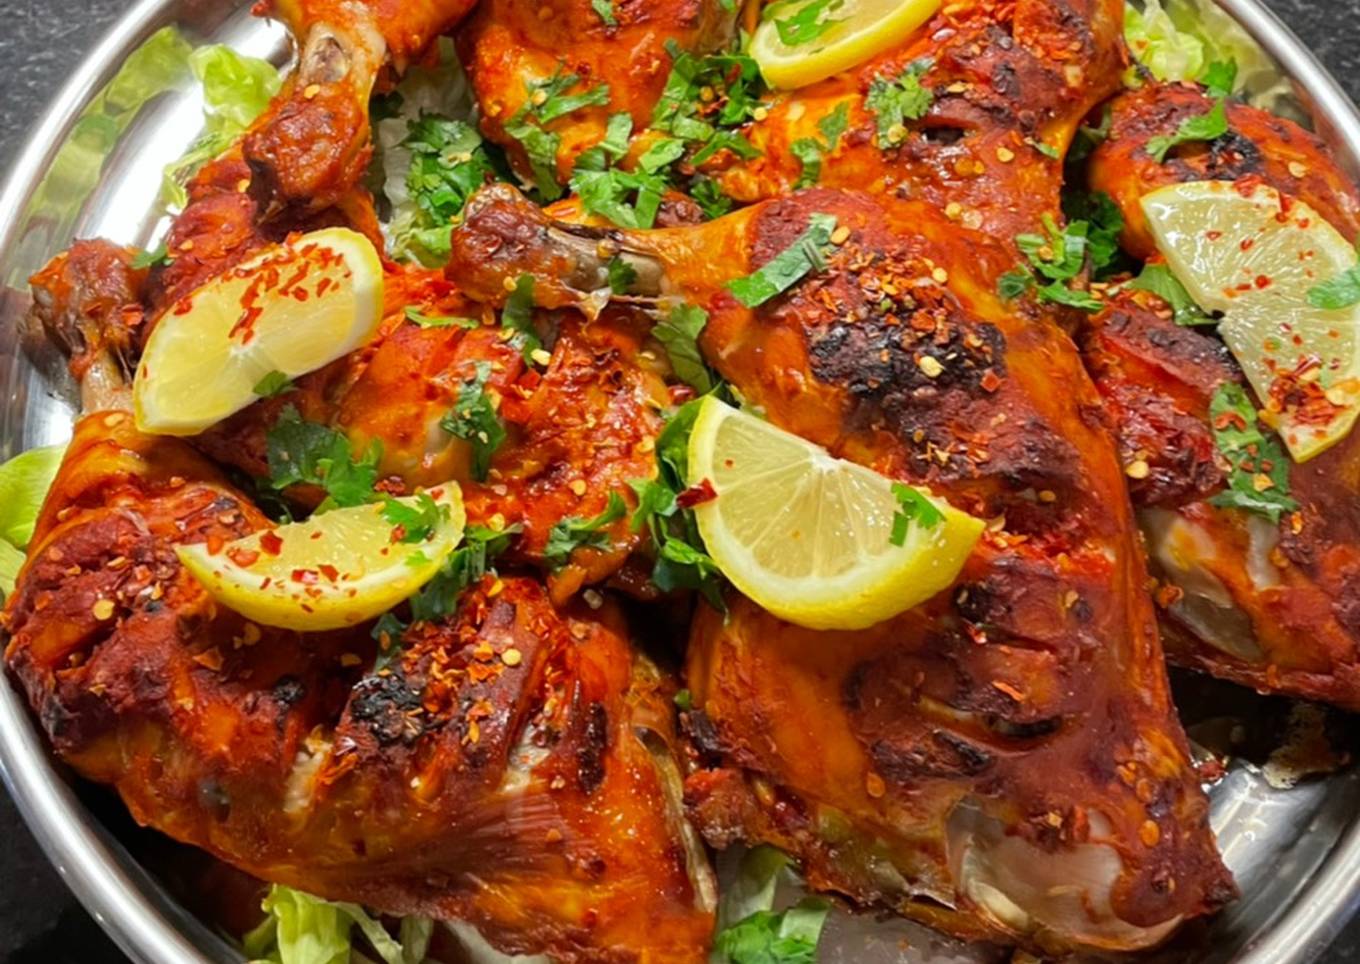 lahori chicken charga baked in oven